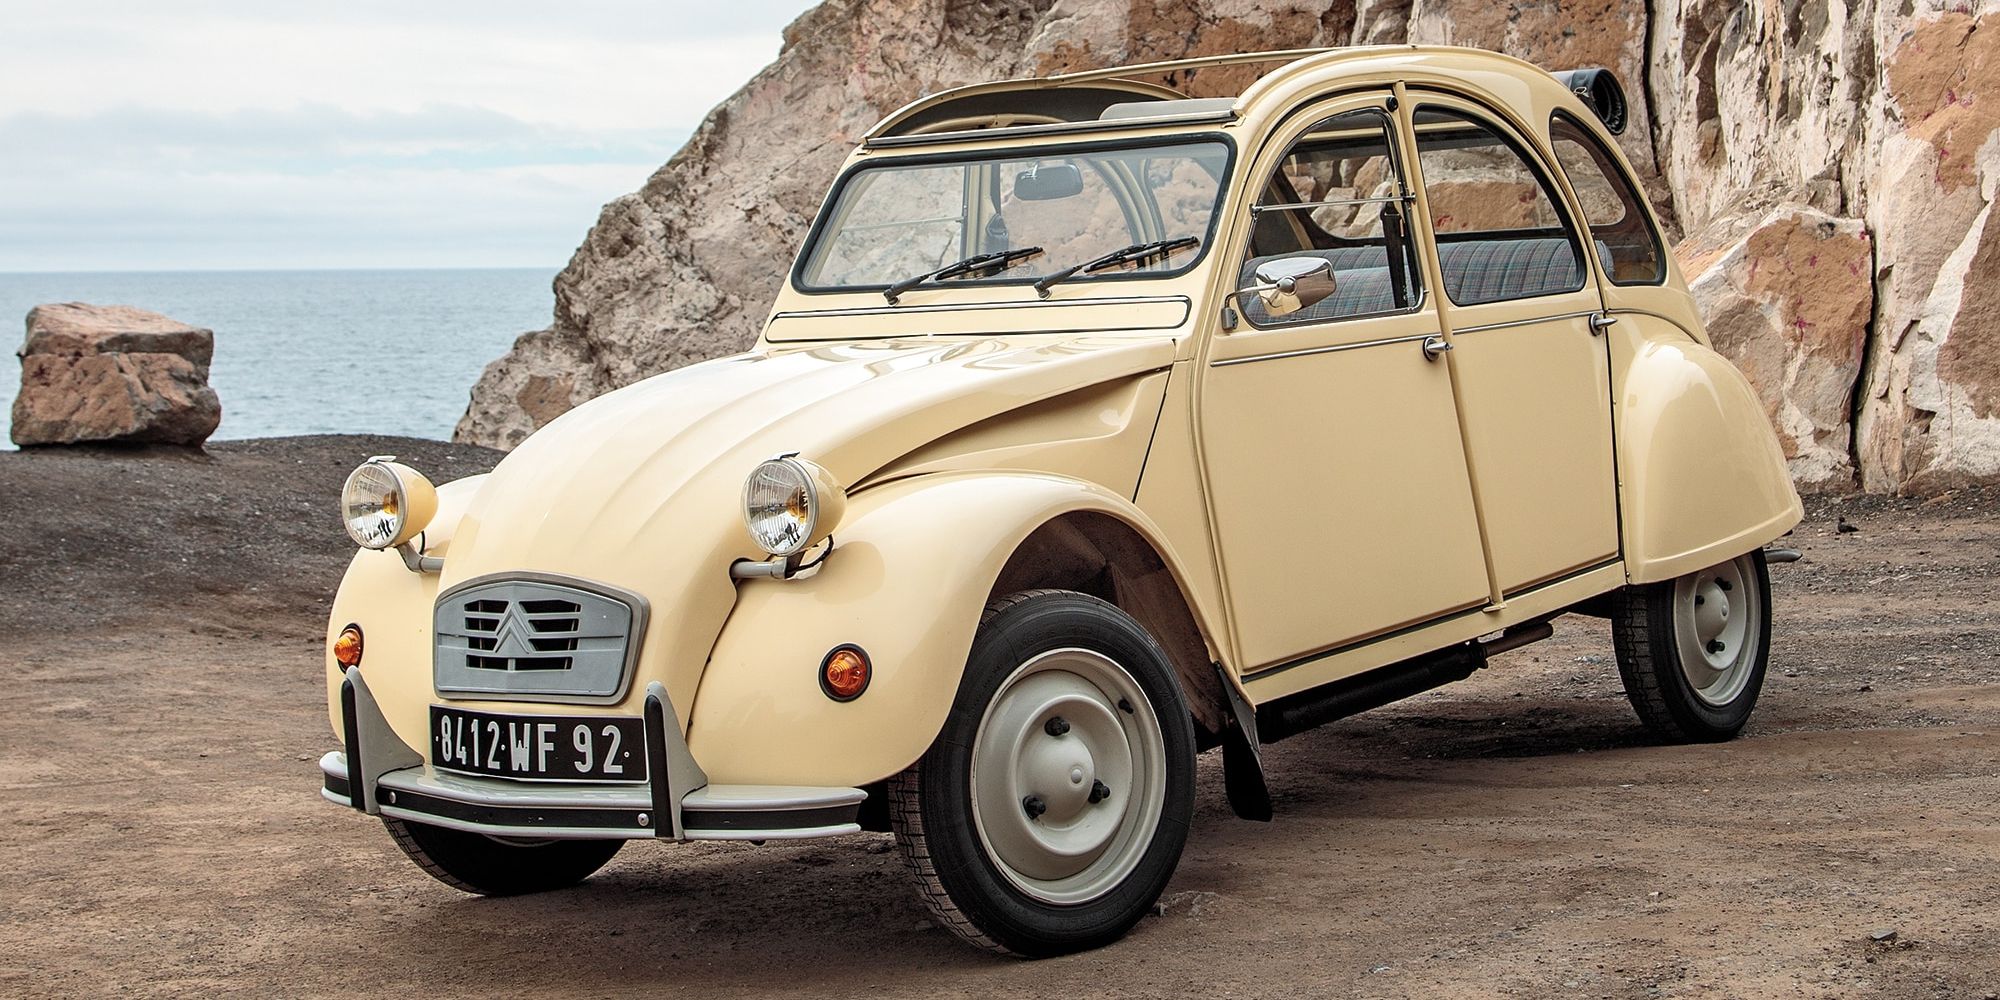 The front of the 2CV